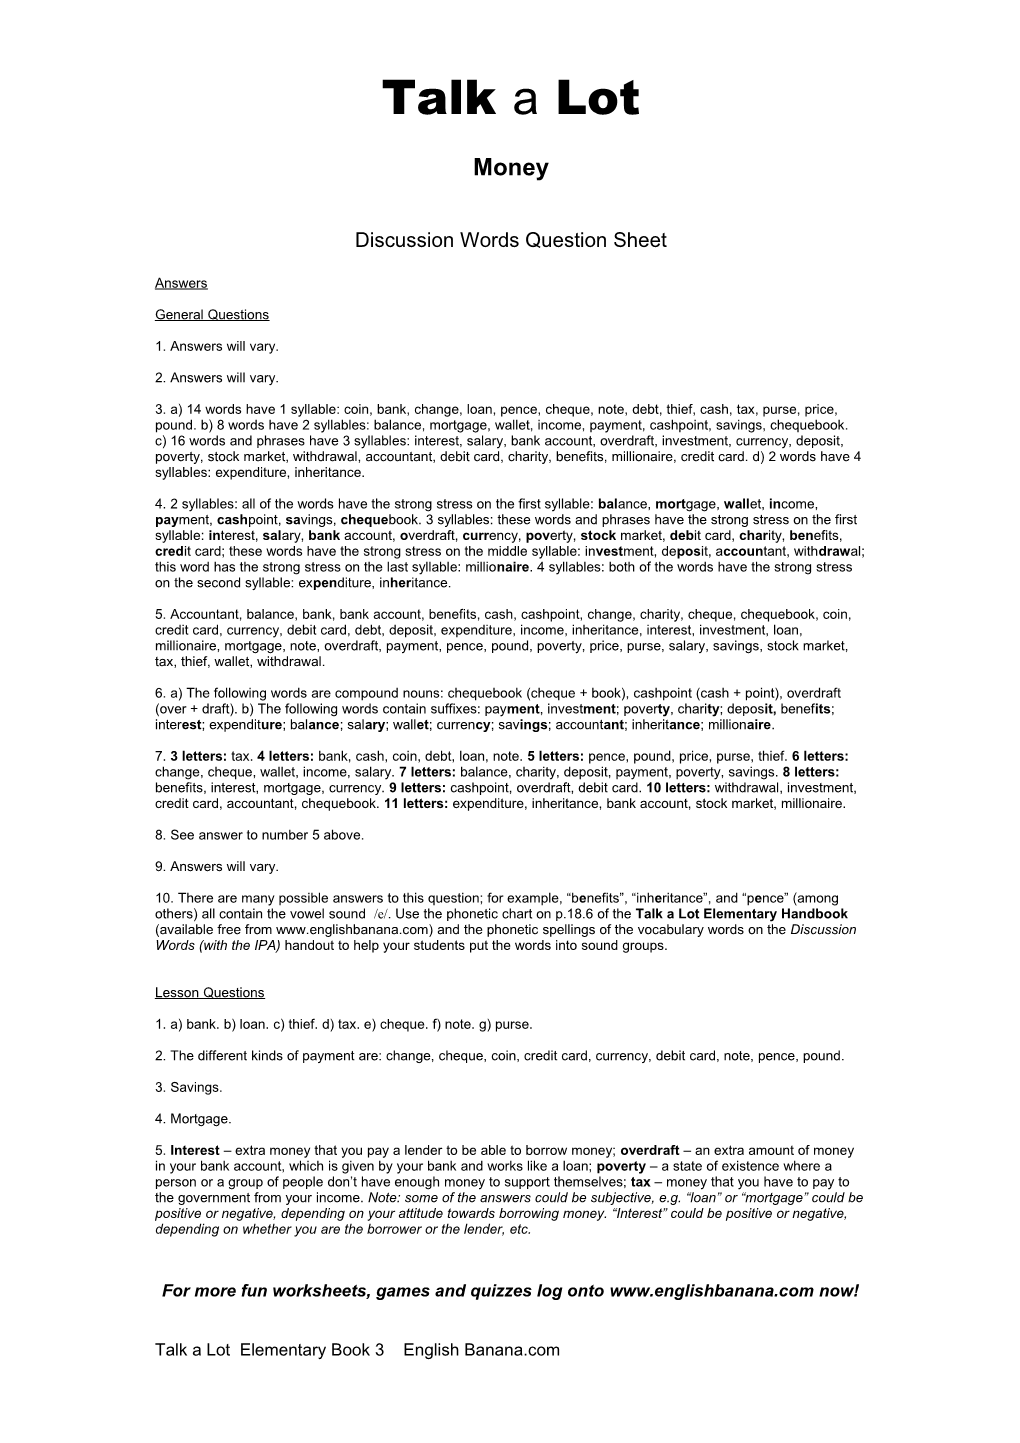 Discussion Words Question Sheet